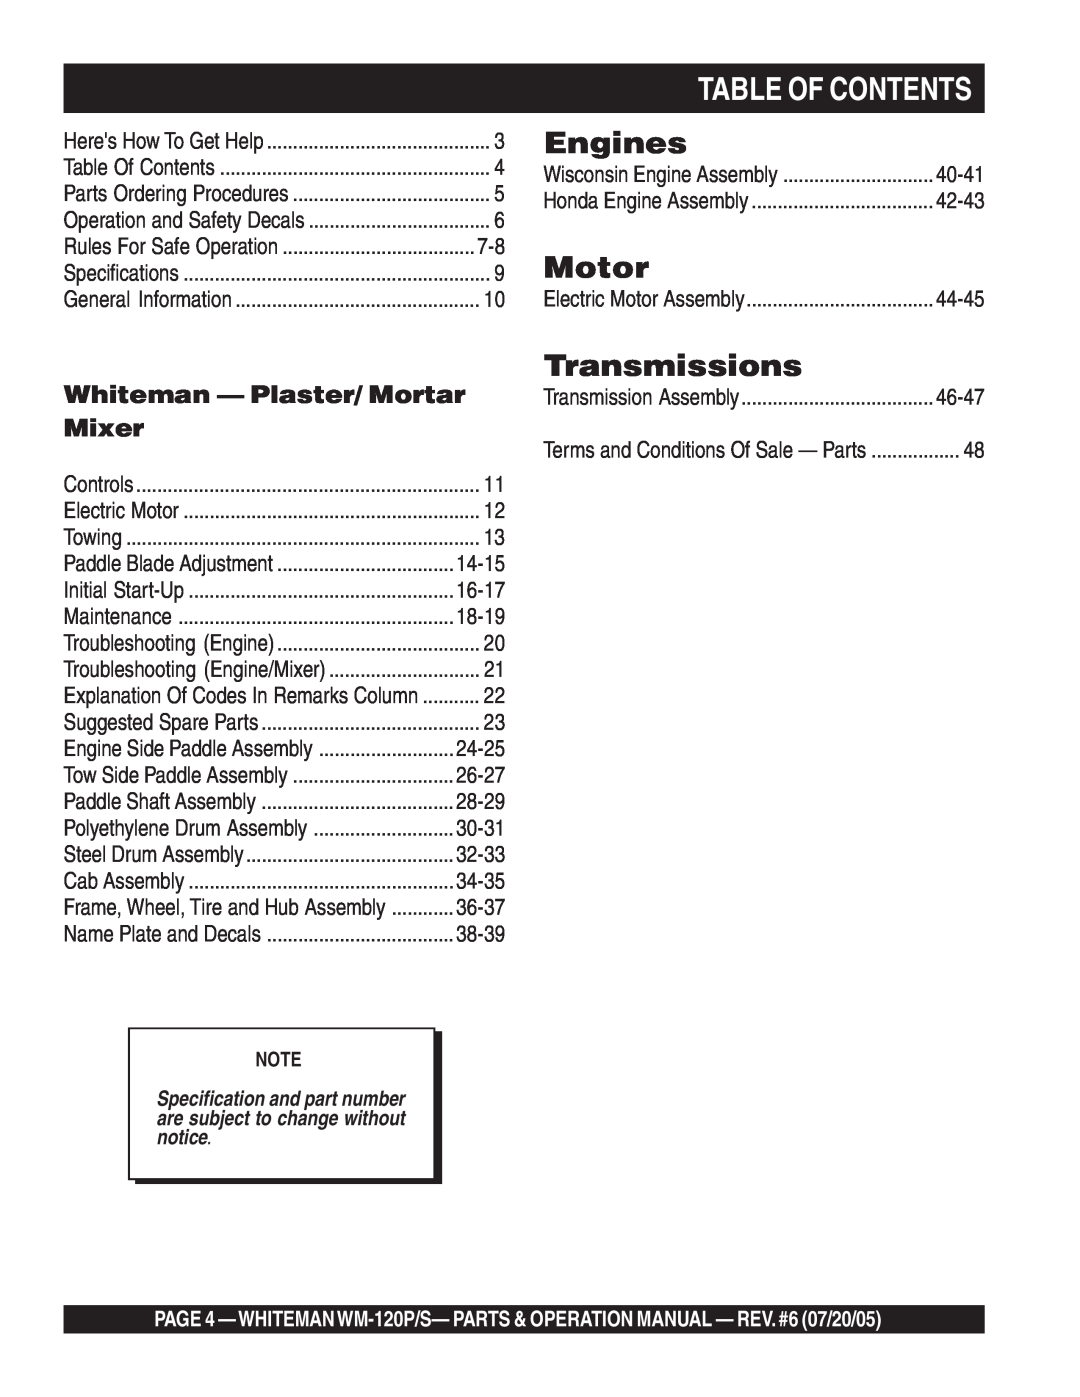 Multiquip WM-120PM operation manual Table Of Contents, Whiteman - Plaster/ Mortar Mixer, Engines, Motor, Transmissions 